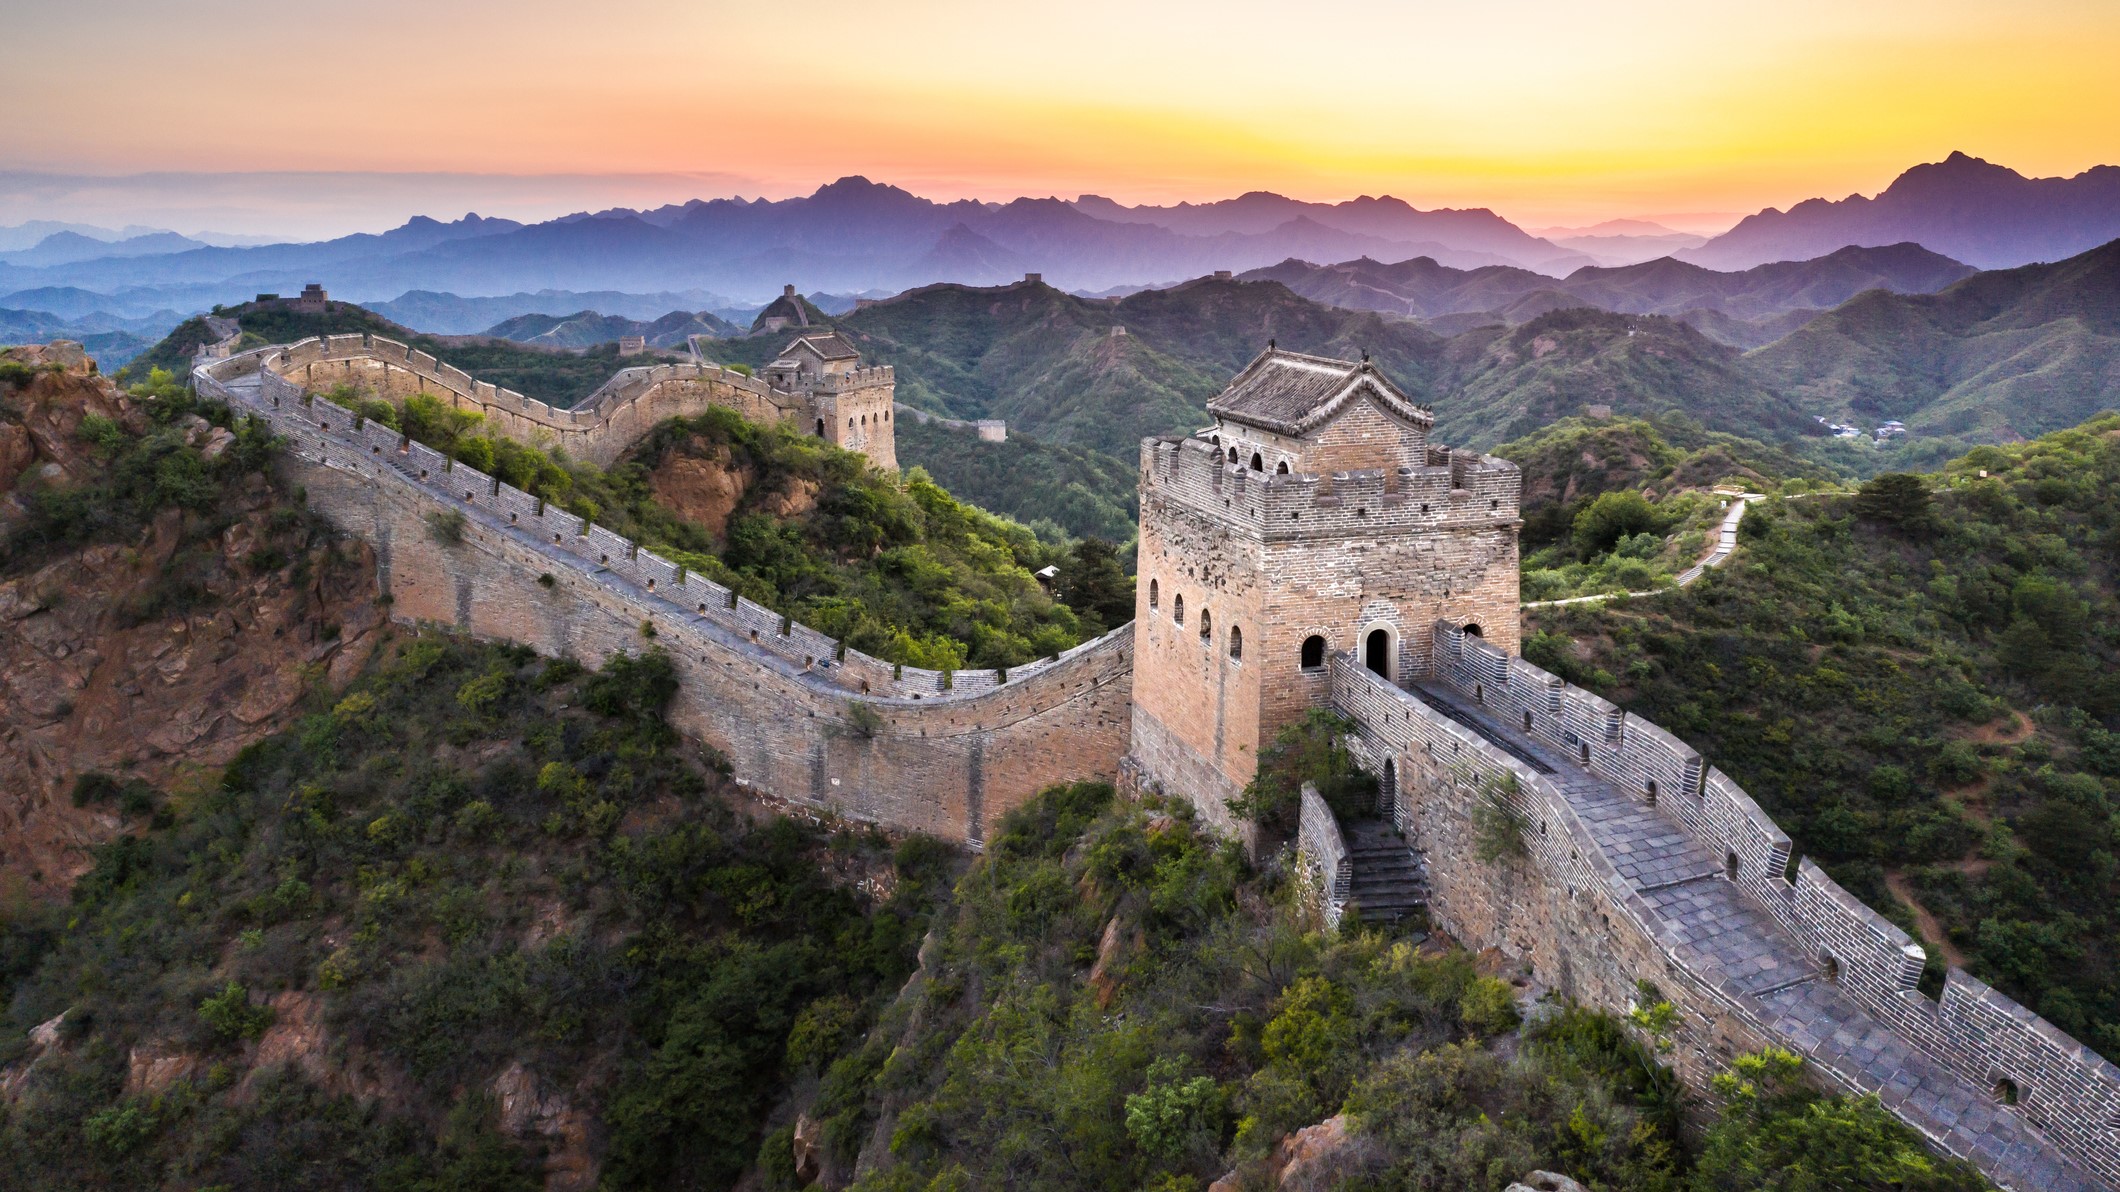 The Great Wall of China snaking through the rugged landscape.